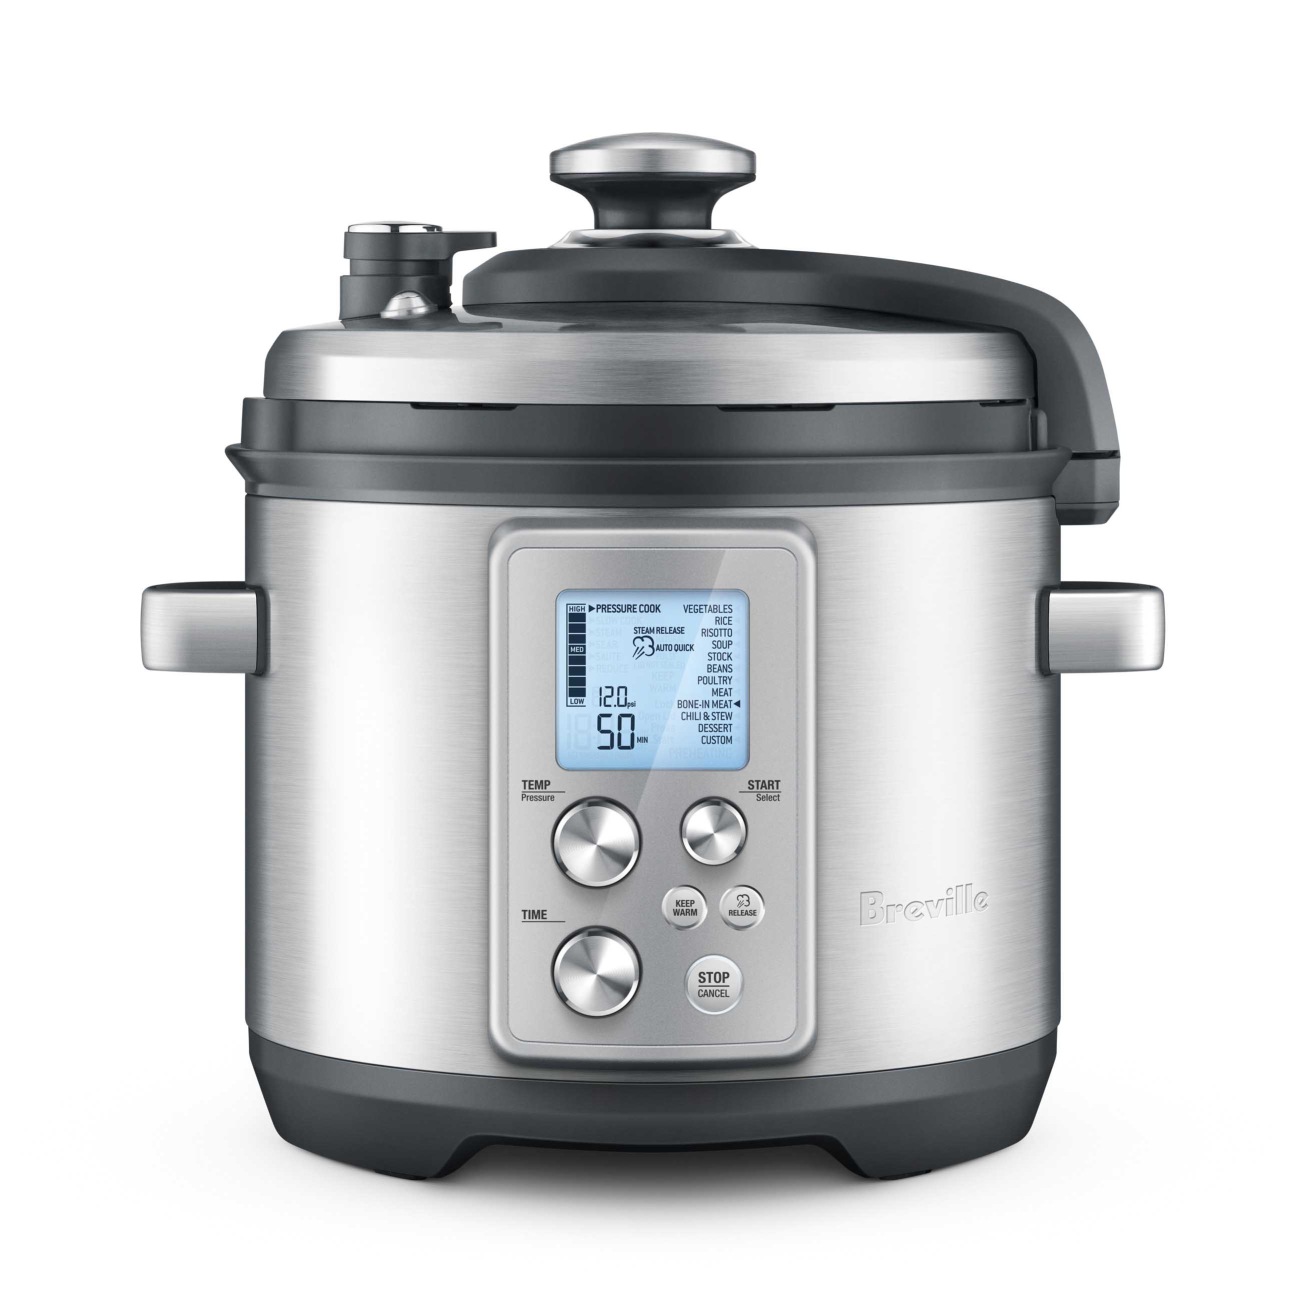 the Fast Slow Pro™ Pressure Cooker